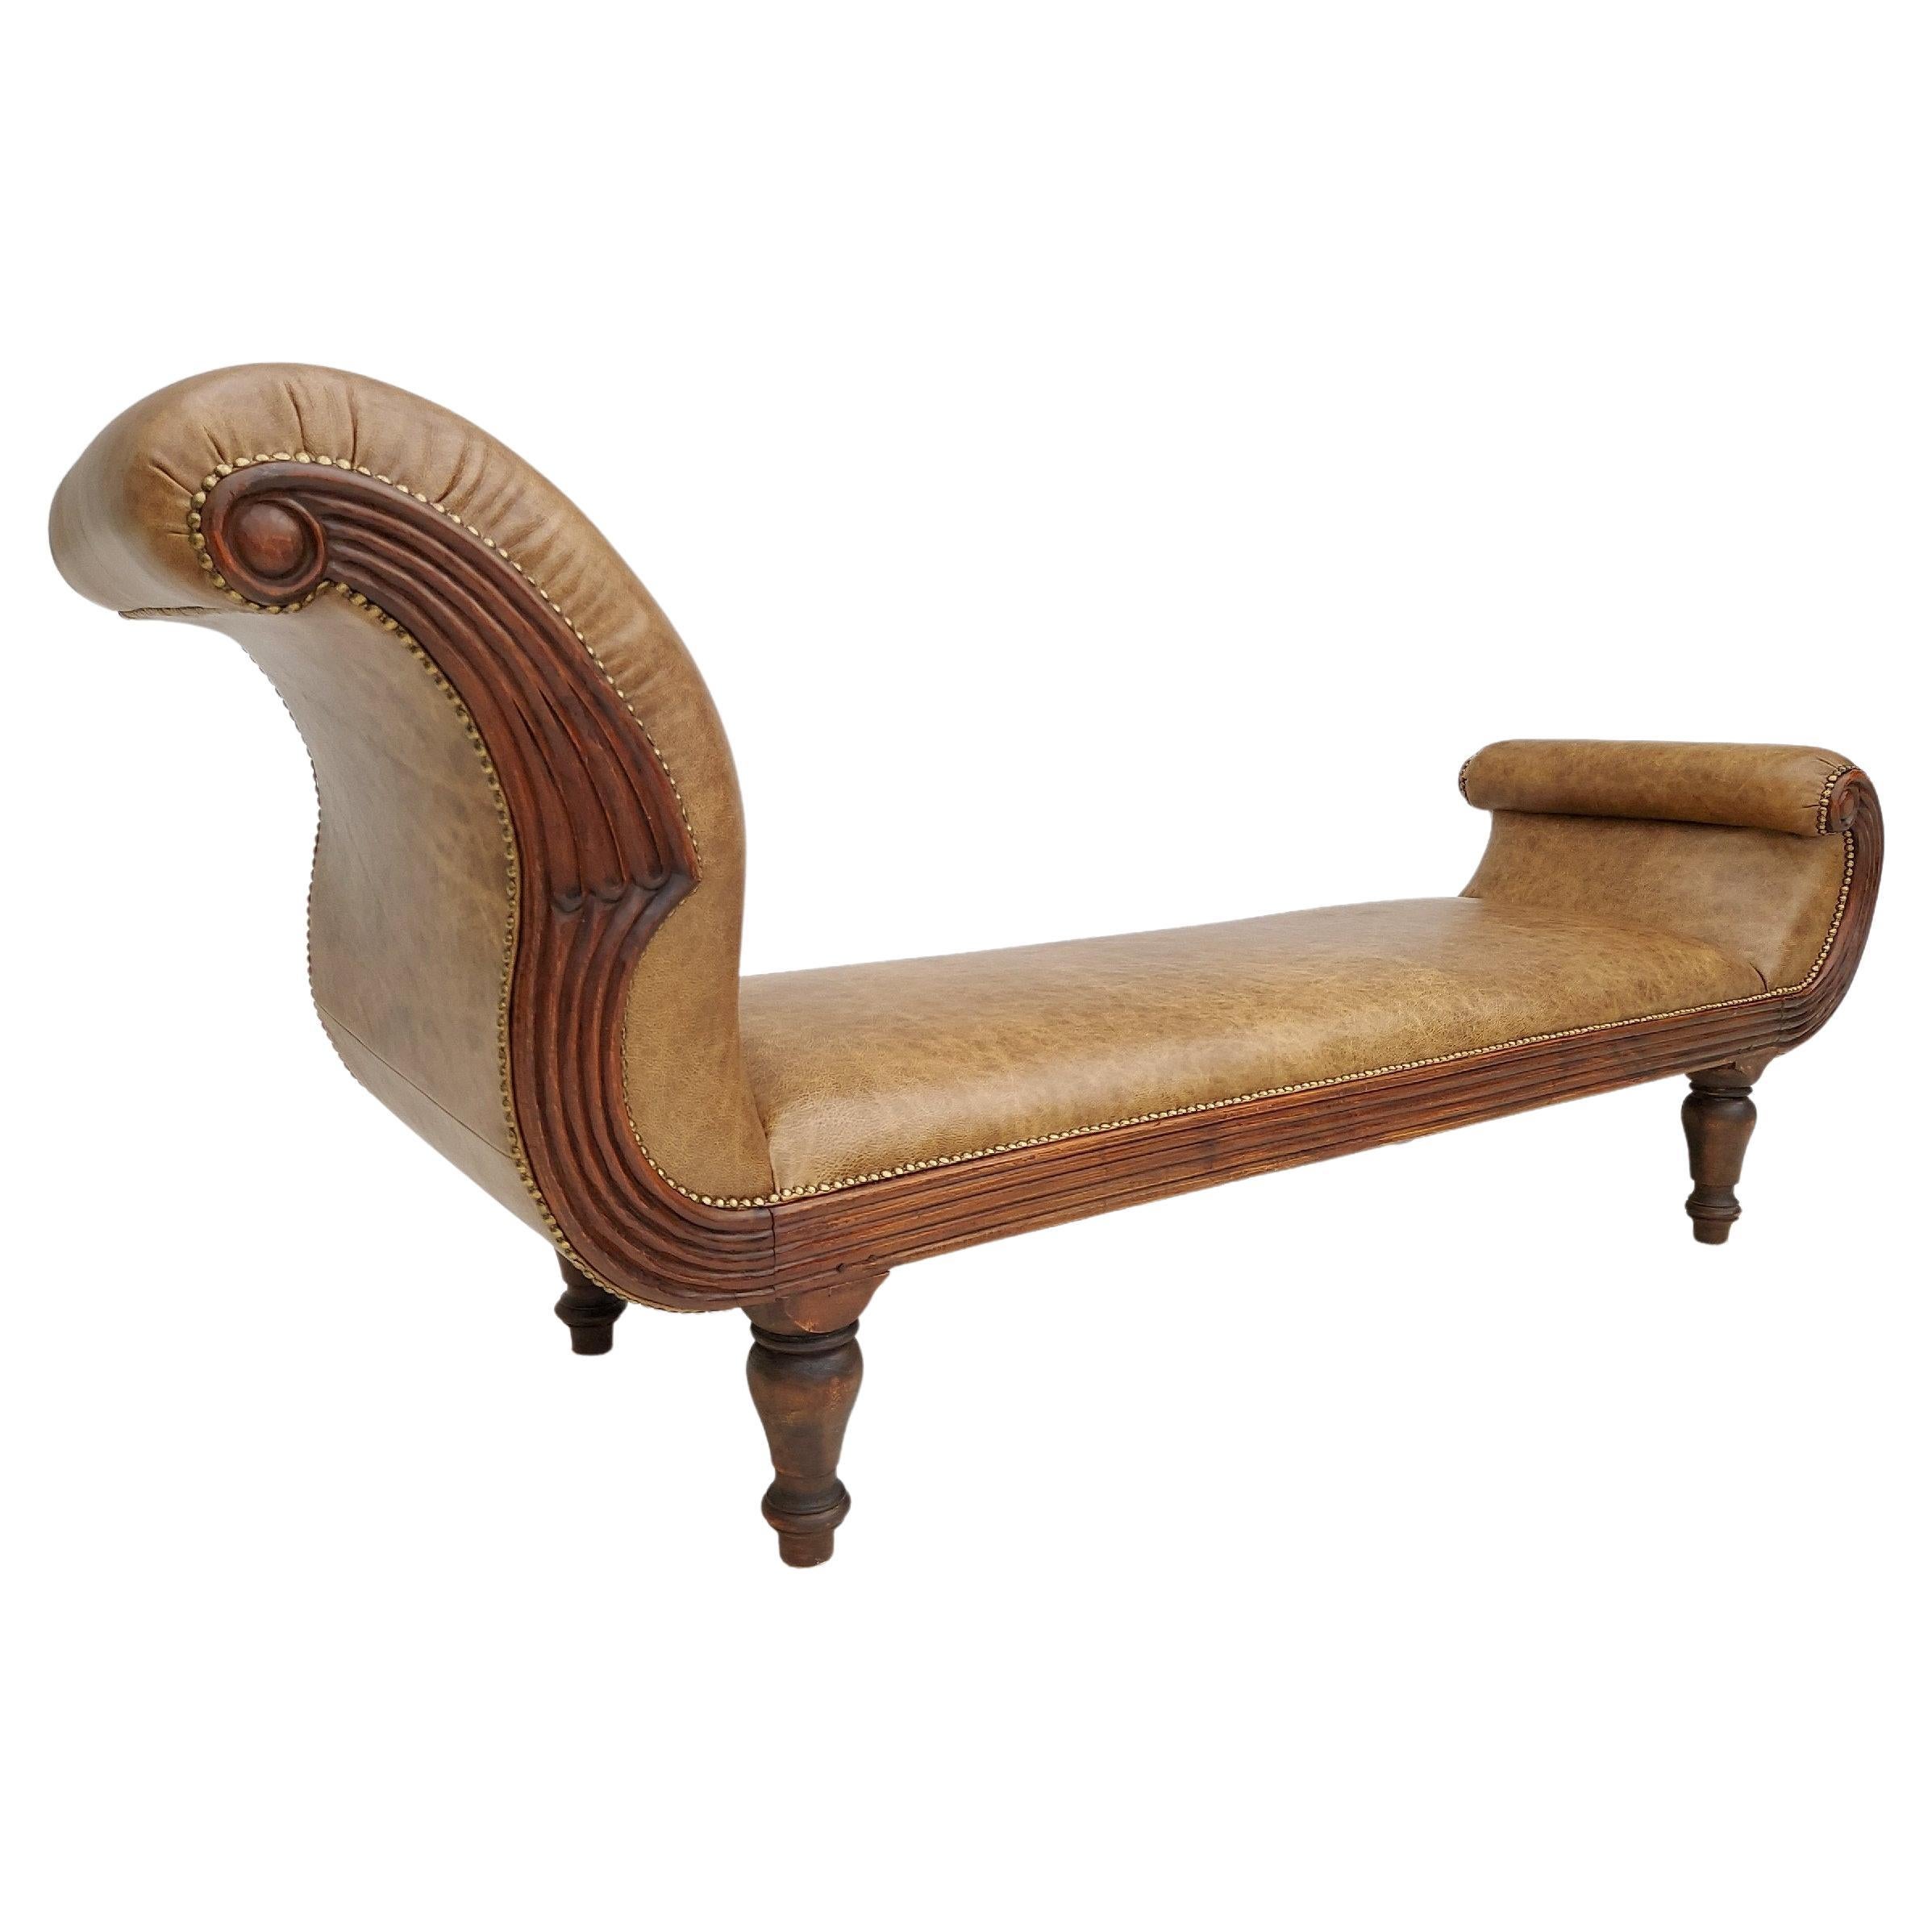 Danish Antique Chaise Longue / Daybed, Early 20th Century, Renovated